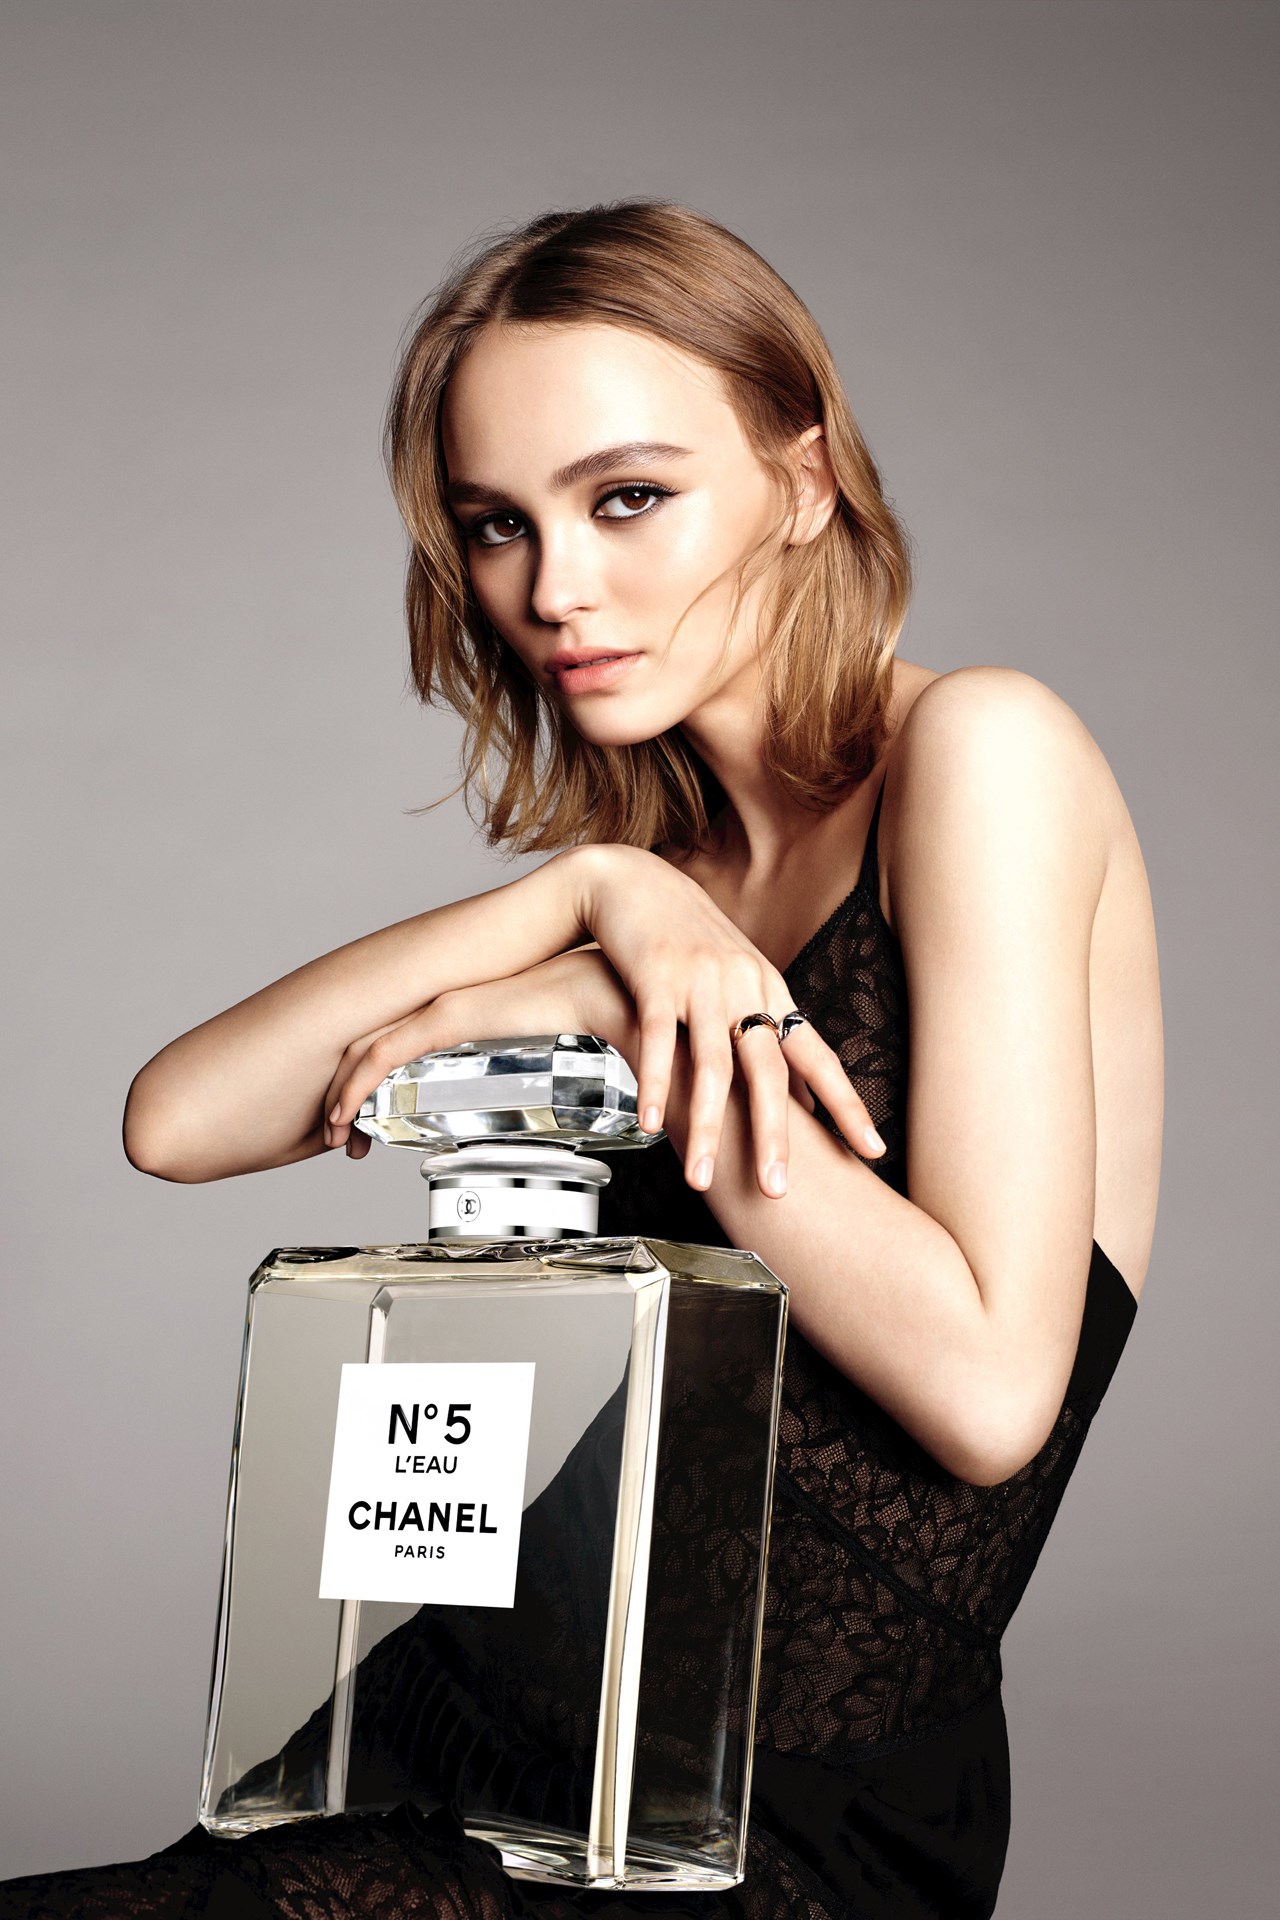 Lily-Rose Depp Chanel no. 5 ad campaign